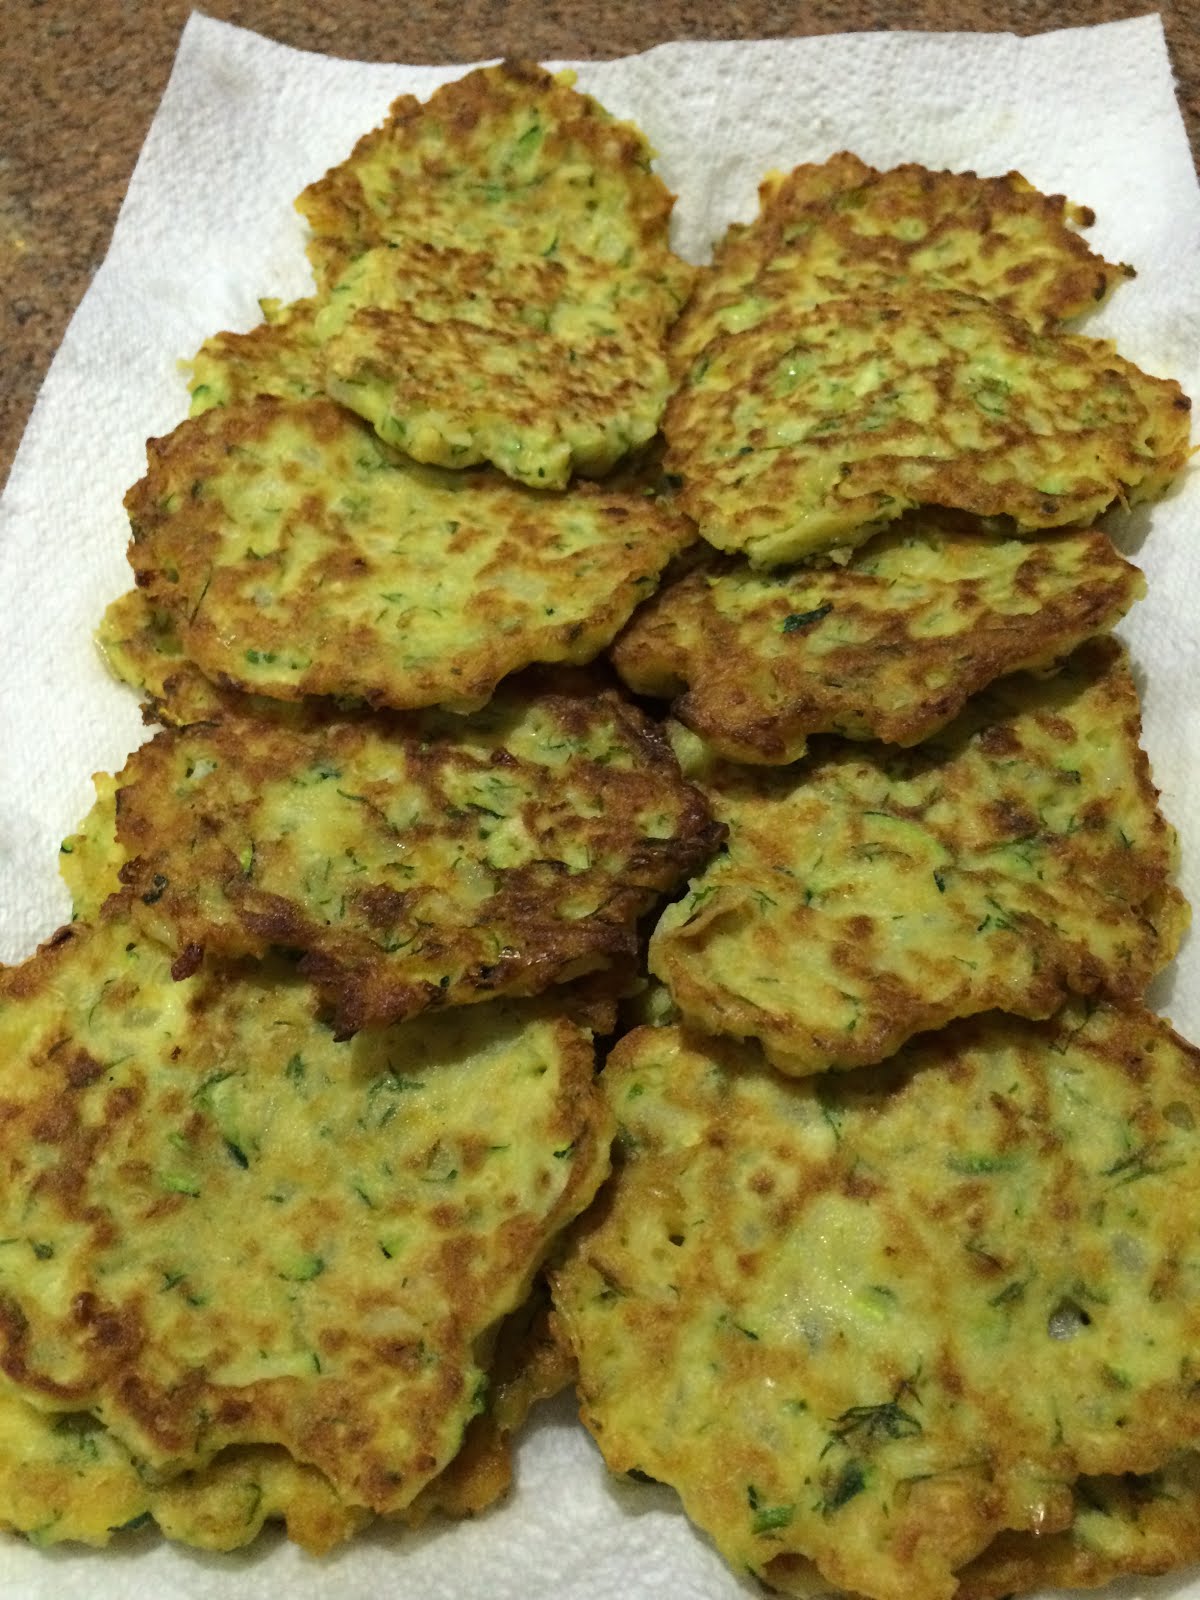 Chickpea and zucchini patties - Stay Home Instead